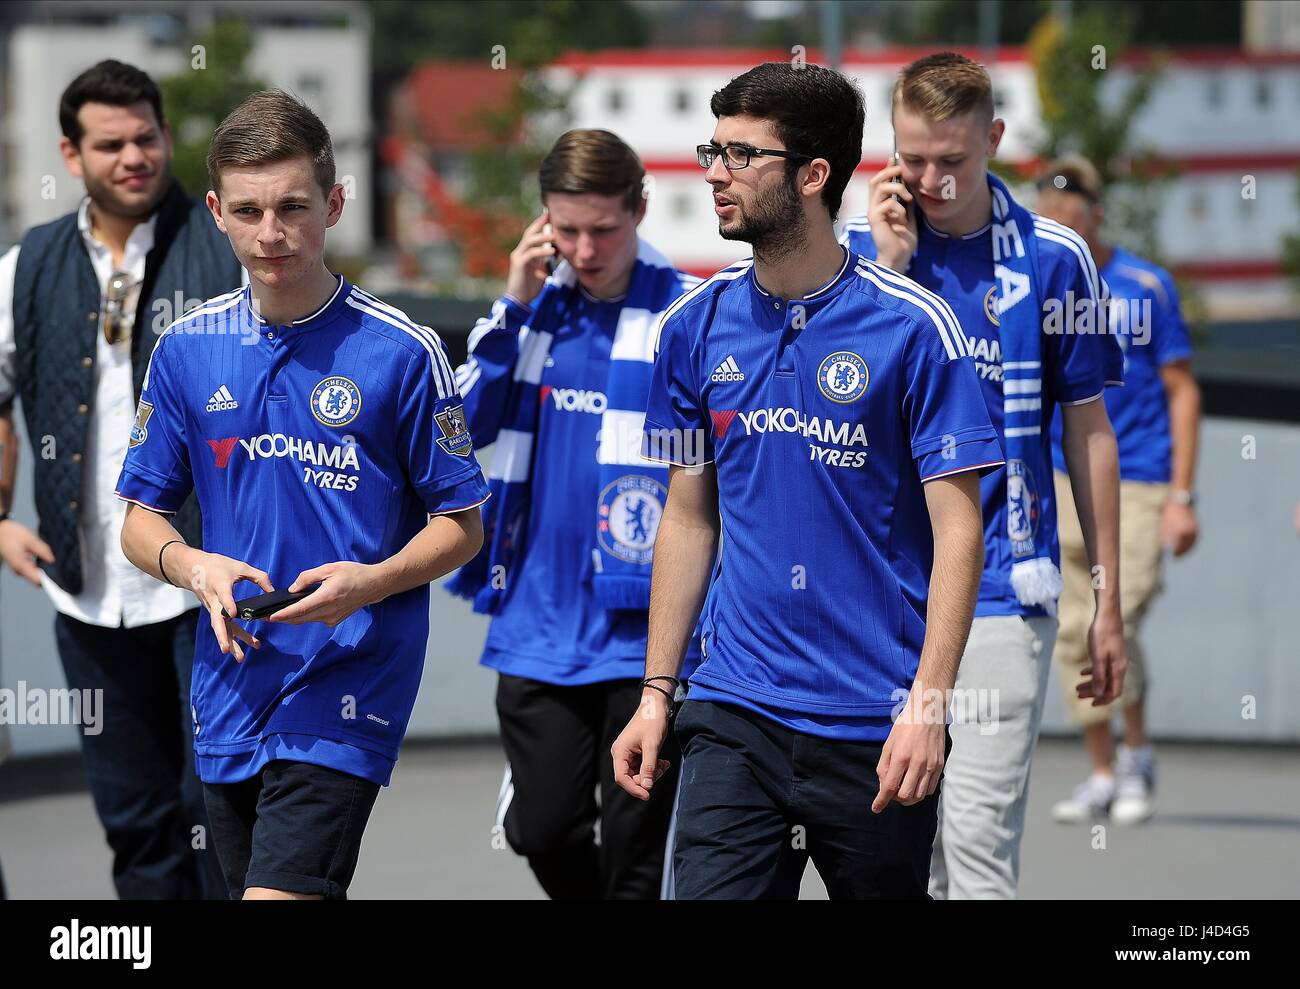 Chelsea Fans Make There Way To Arsenal V Chelsea Wembley Stadium London England 02 August 15 Stock Photo Alamy